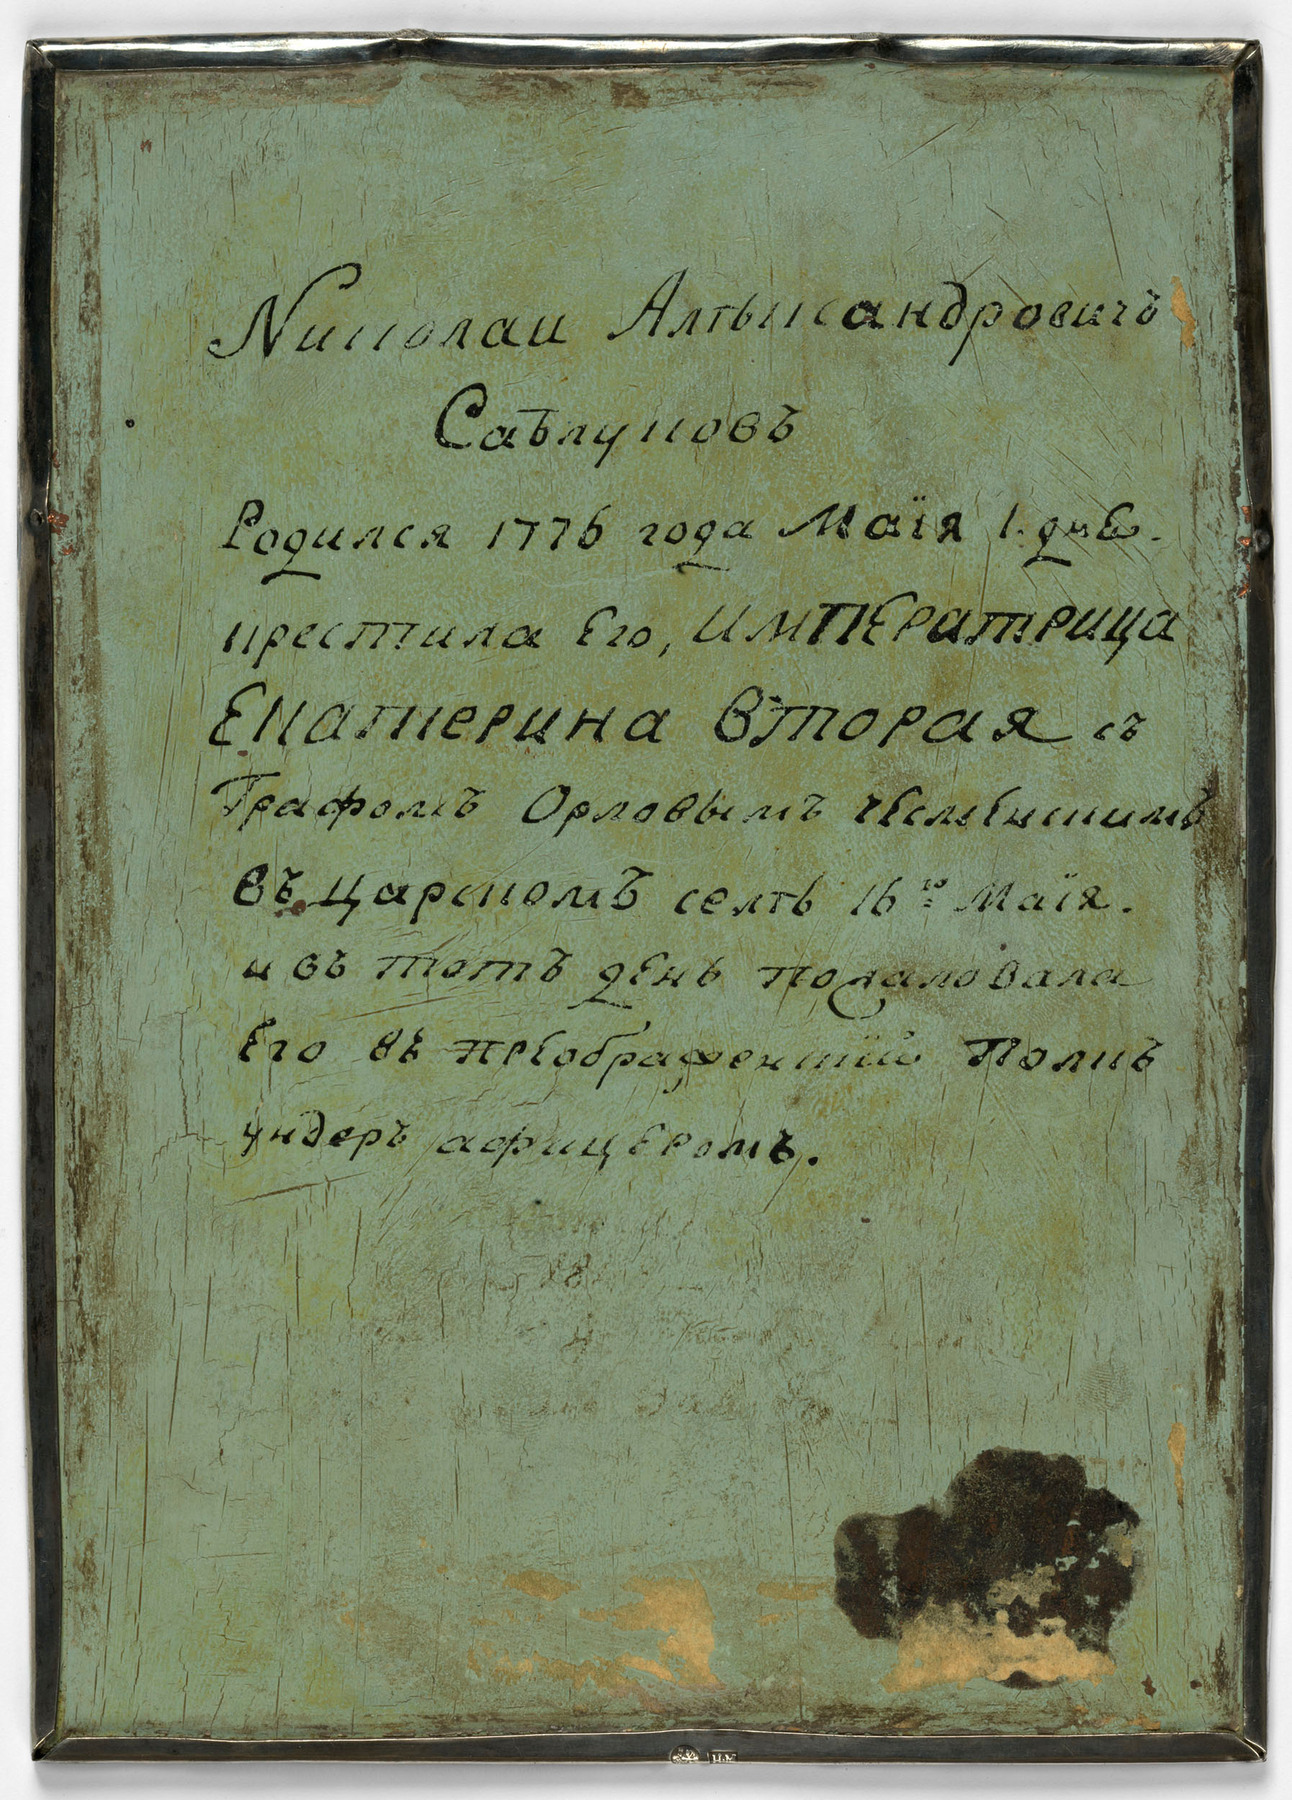 FEODOR BOGNEVSKY, ST PETERSBURG, 18TH CENTURY, OIL ON COPPER, FRAME STAMPED WITH MARK OF ‘N.M’ IN CYRILLIC